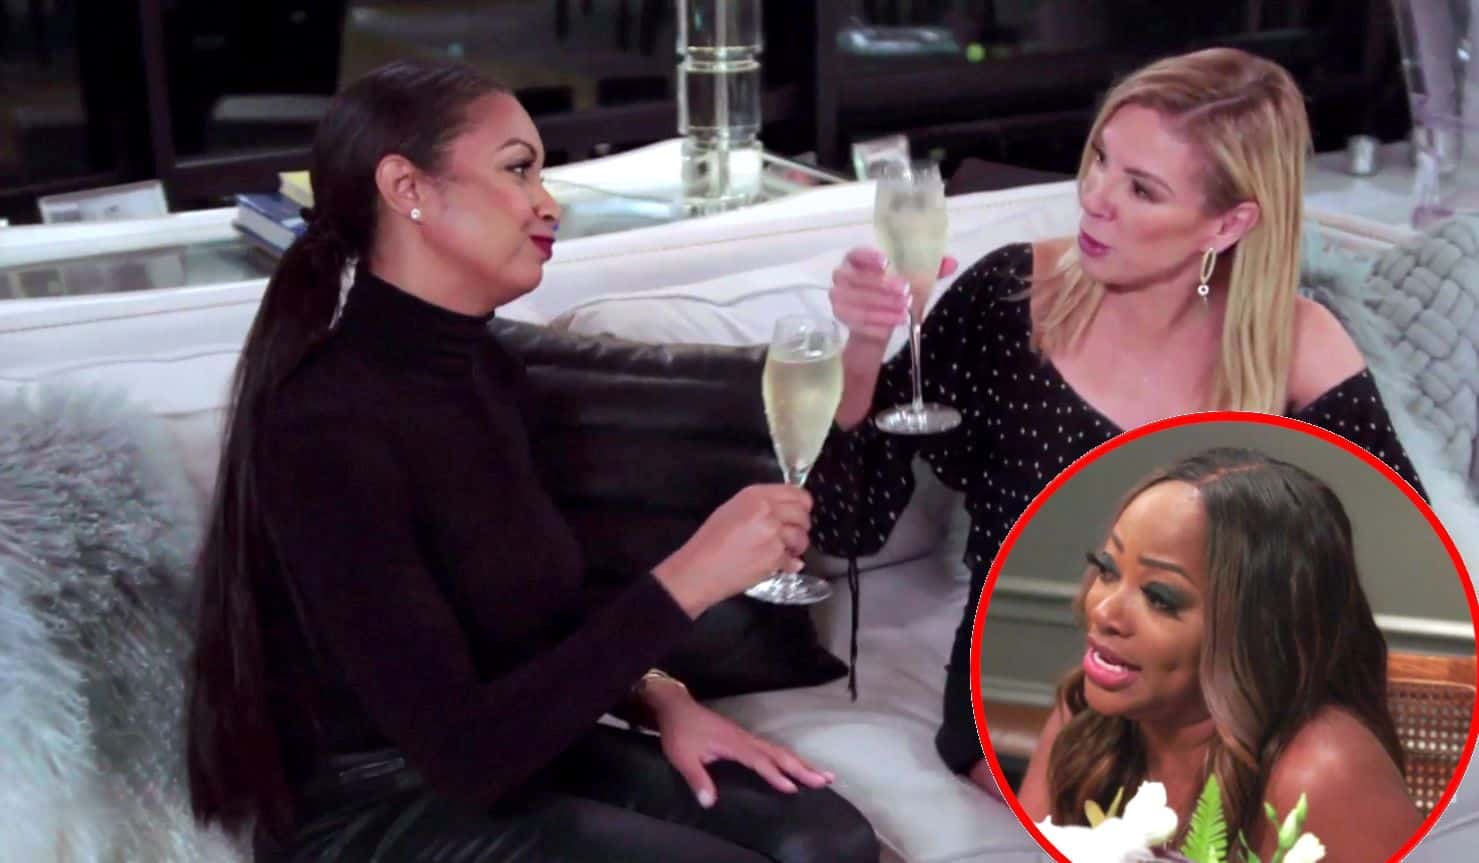 RHONY Recap: Ramona Shuts Down Political Conversations With Eboni, Bershan Makes Her Debut and Luann Bonds With Daughter Over Their Sobriety